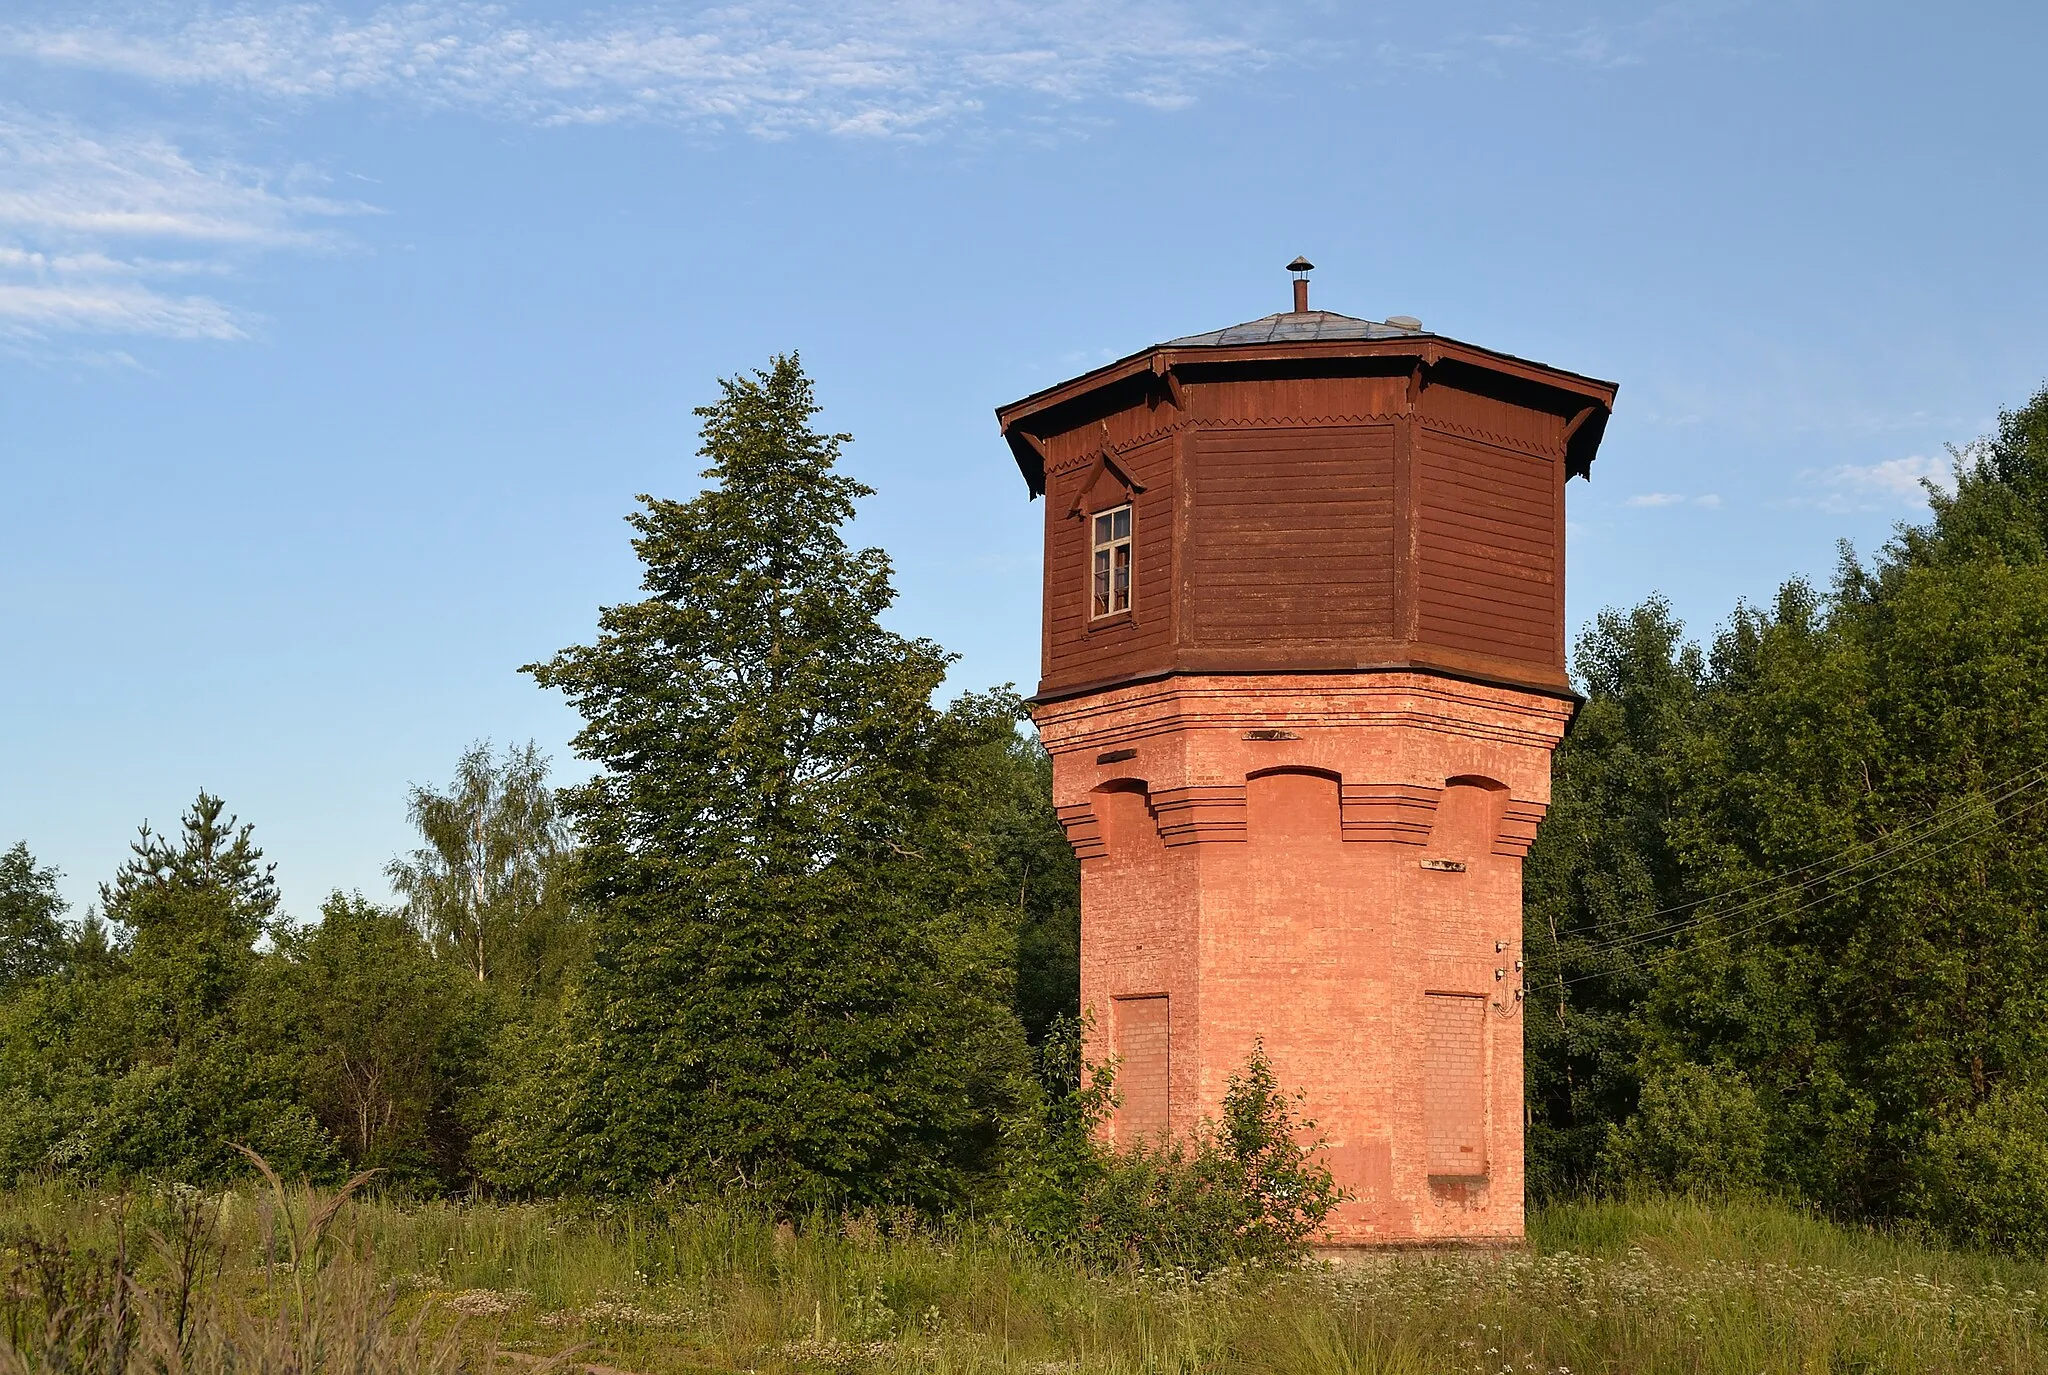 Photo showing: Sangaste station water tower, built in the late 19th century